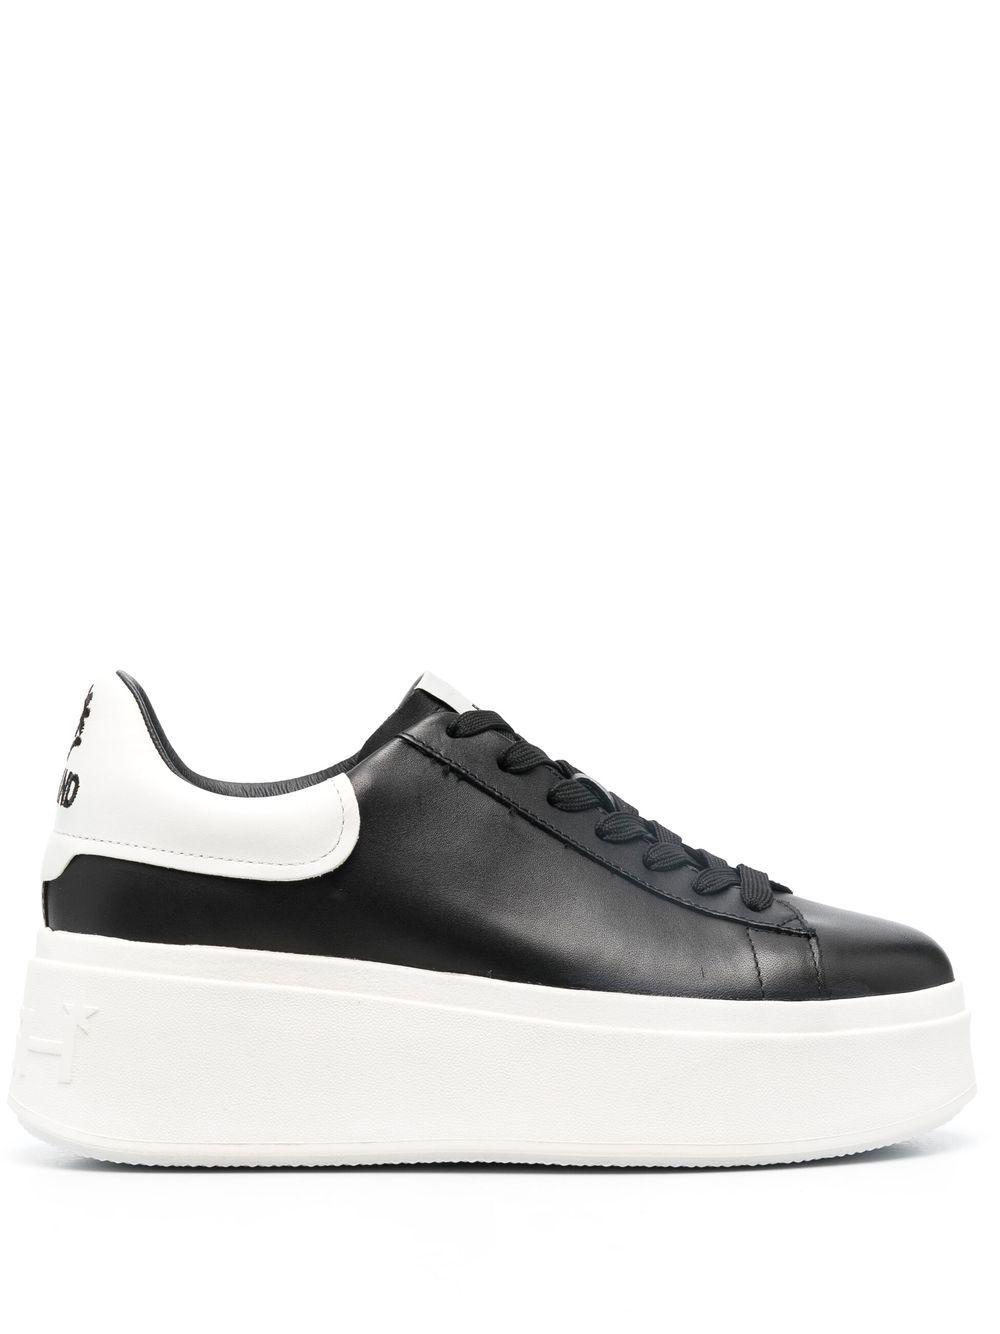 Ash Moby Leather Flatform Sneakers in Black | Lyst